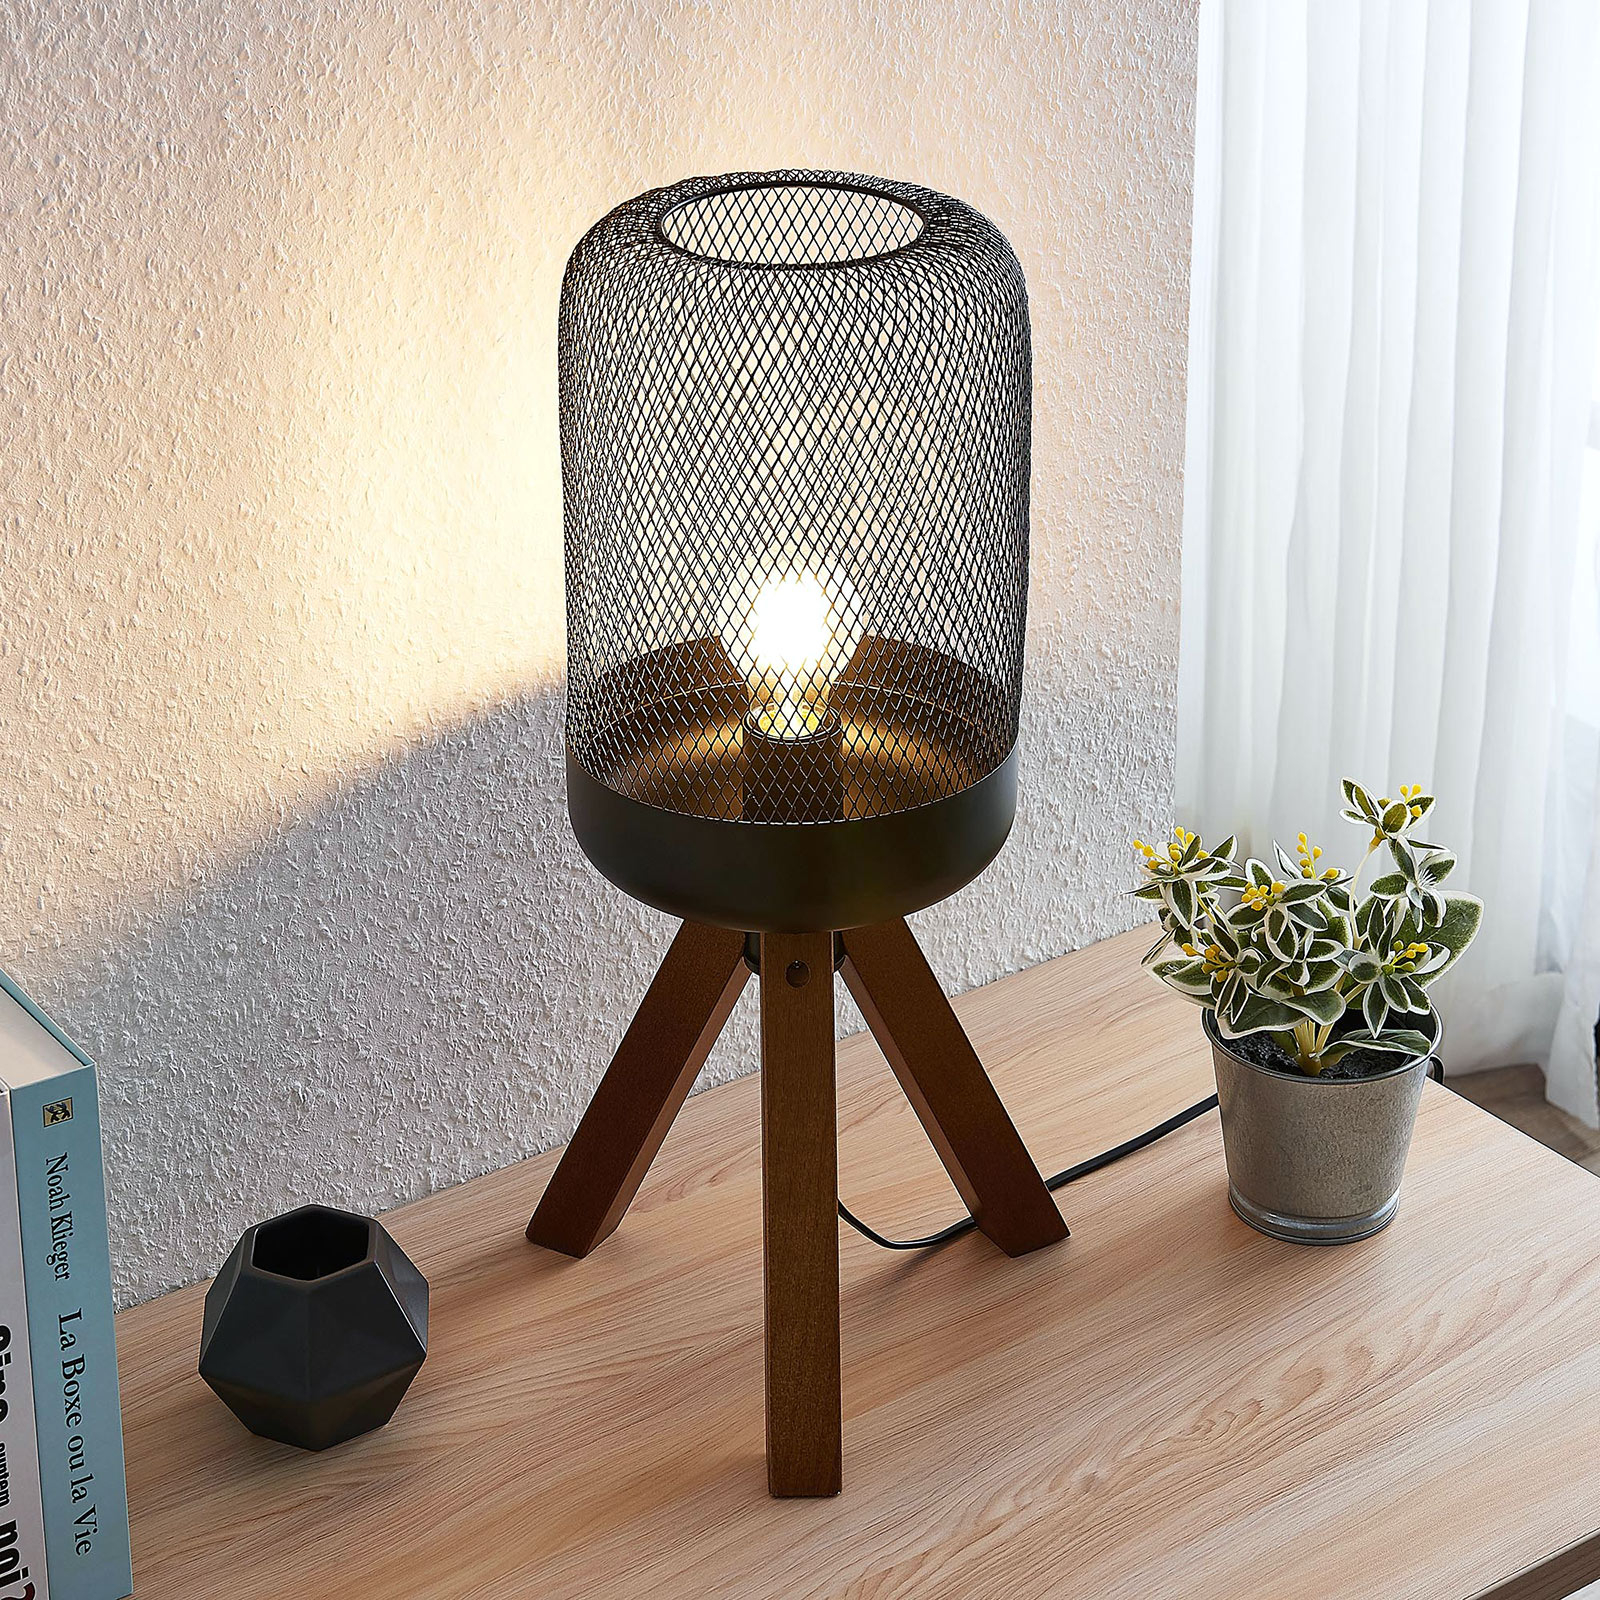 Lindby Eymen tripod table lamp with cage lampshade